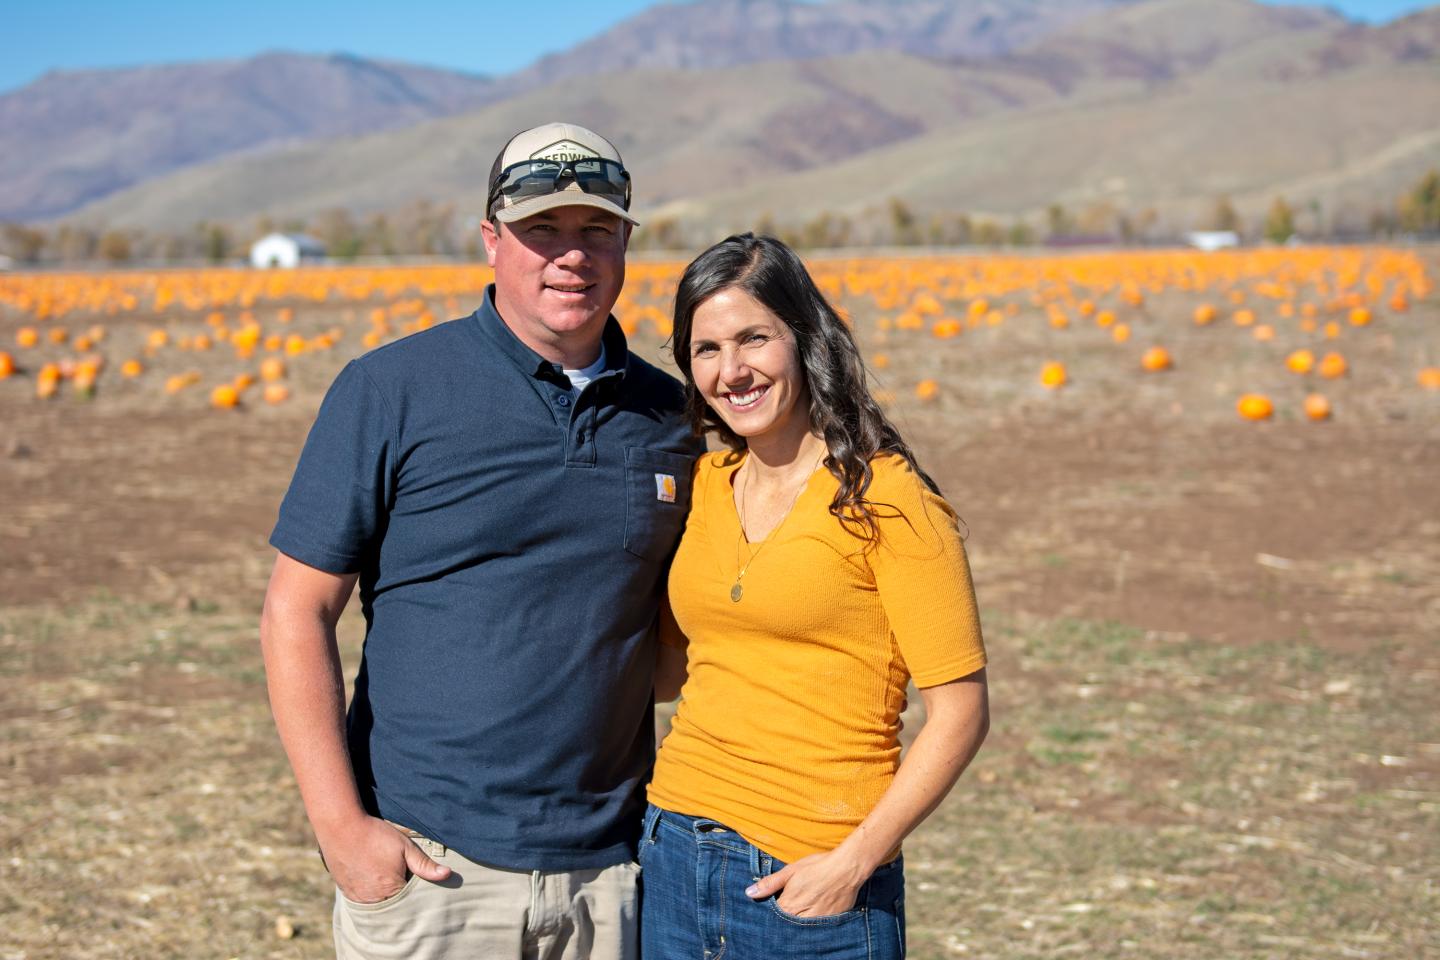 Two people smile at camera in front of rows of pumpkins and mountains